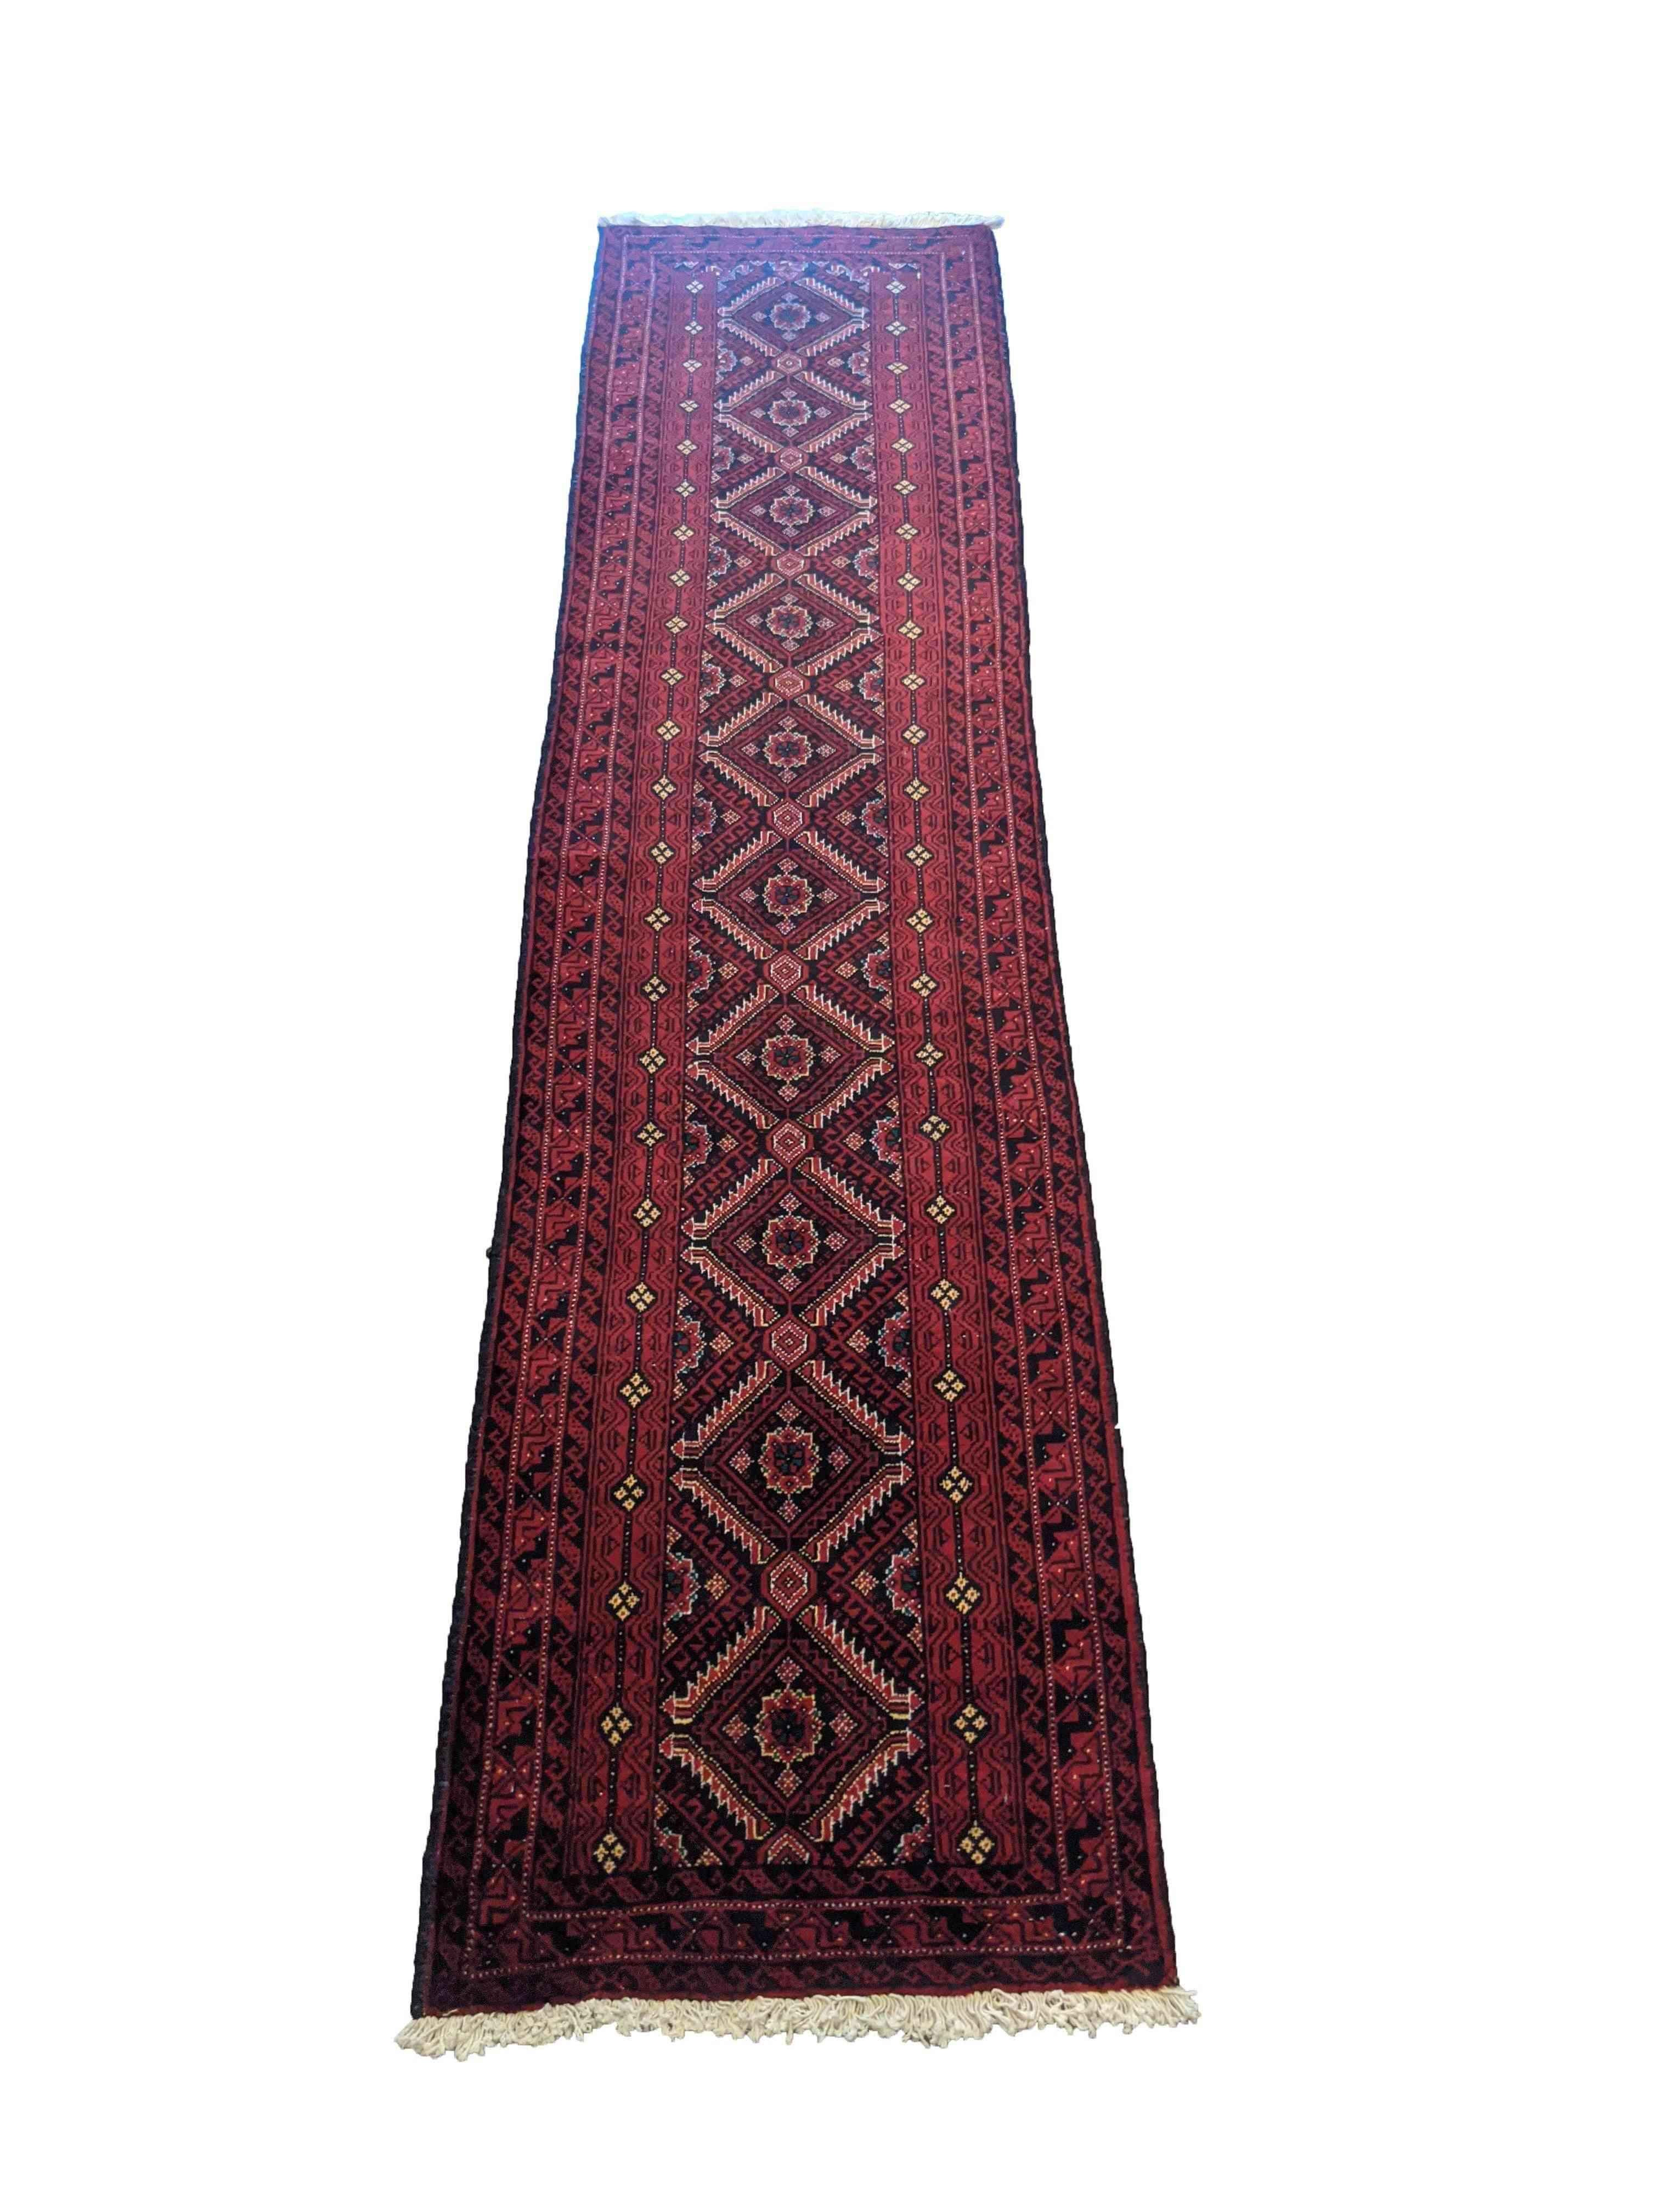 276 x 66 cm Persian Baluch Traditional Red Rug - Rugmaster